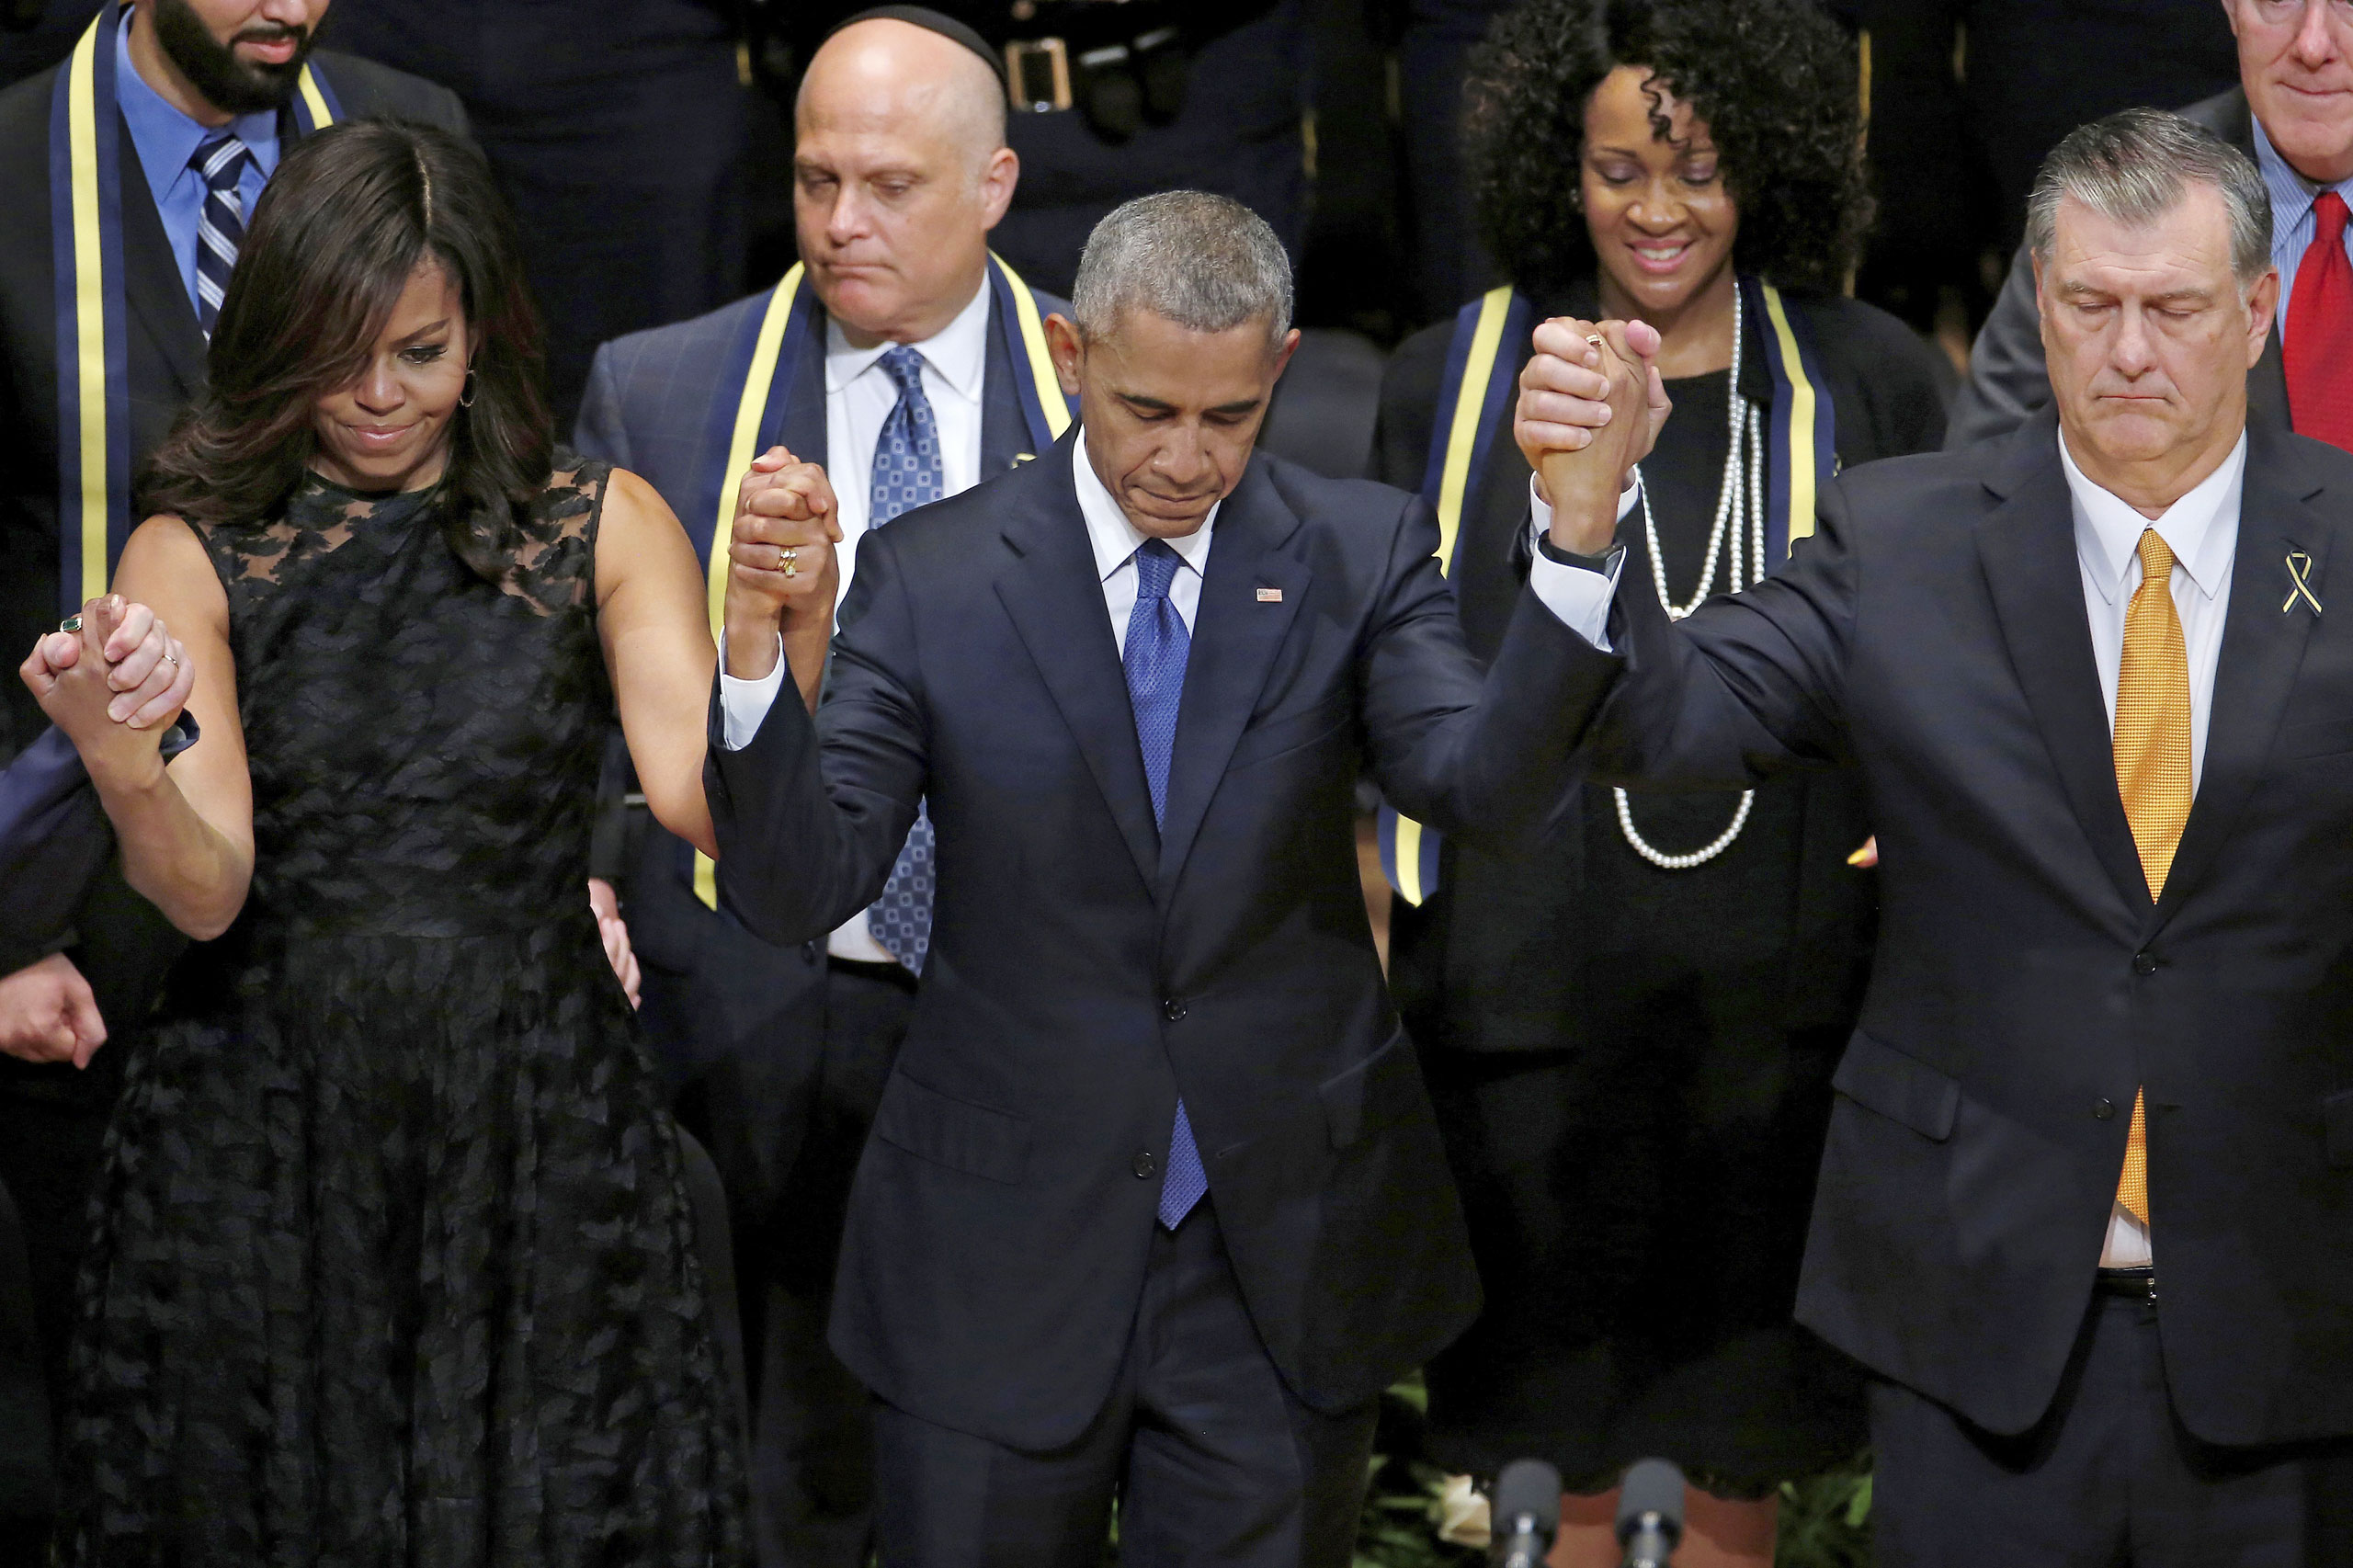 At a service for the five Dallas police officers killed on July 8, President Obama, with Michelle Obama and Dallas Mayor Mike Rawlings, said he had “spoken at too many memorials” (Carlo Allegri—Reuters)